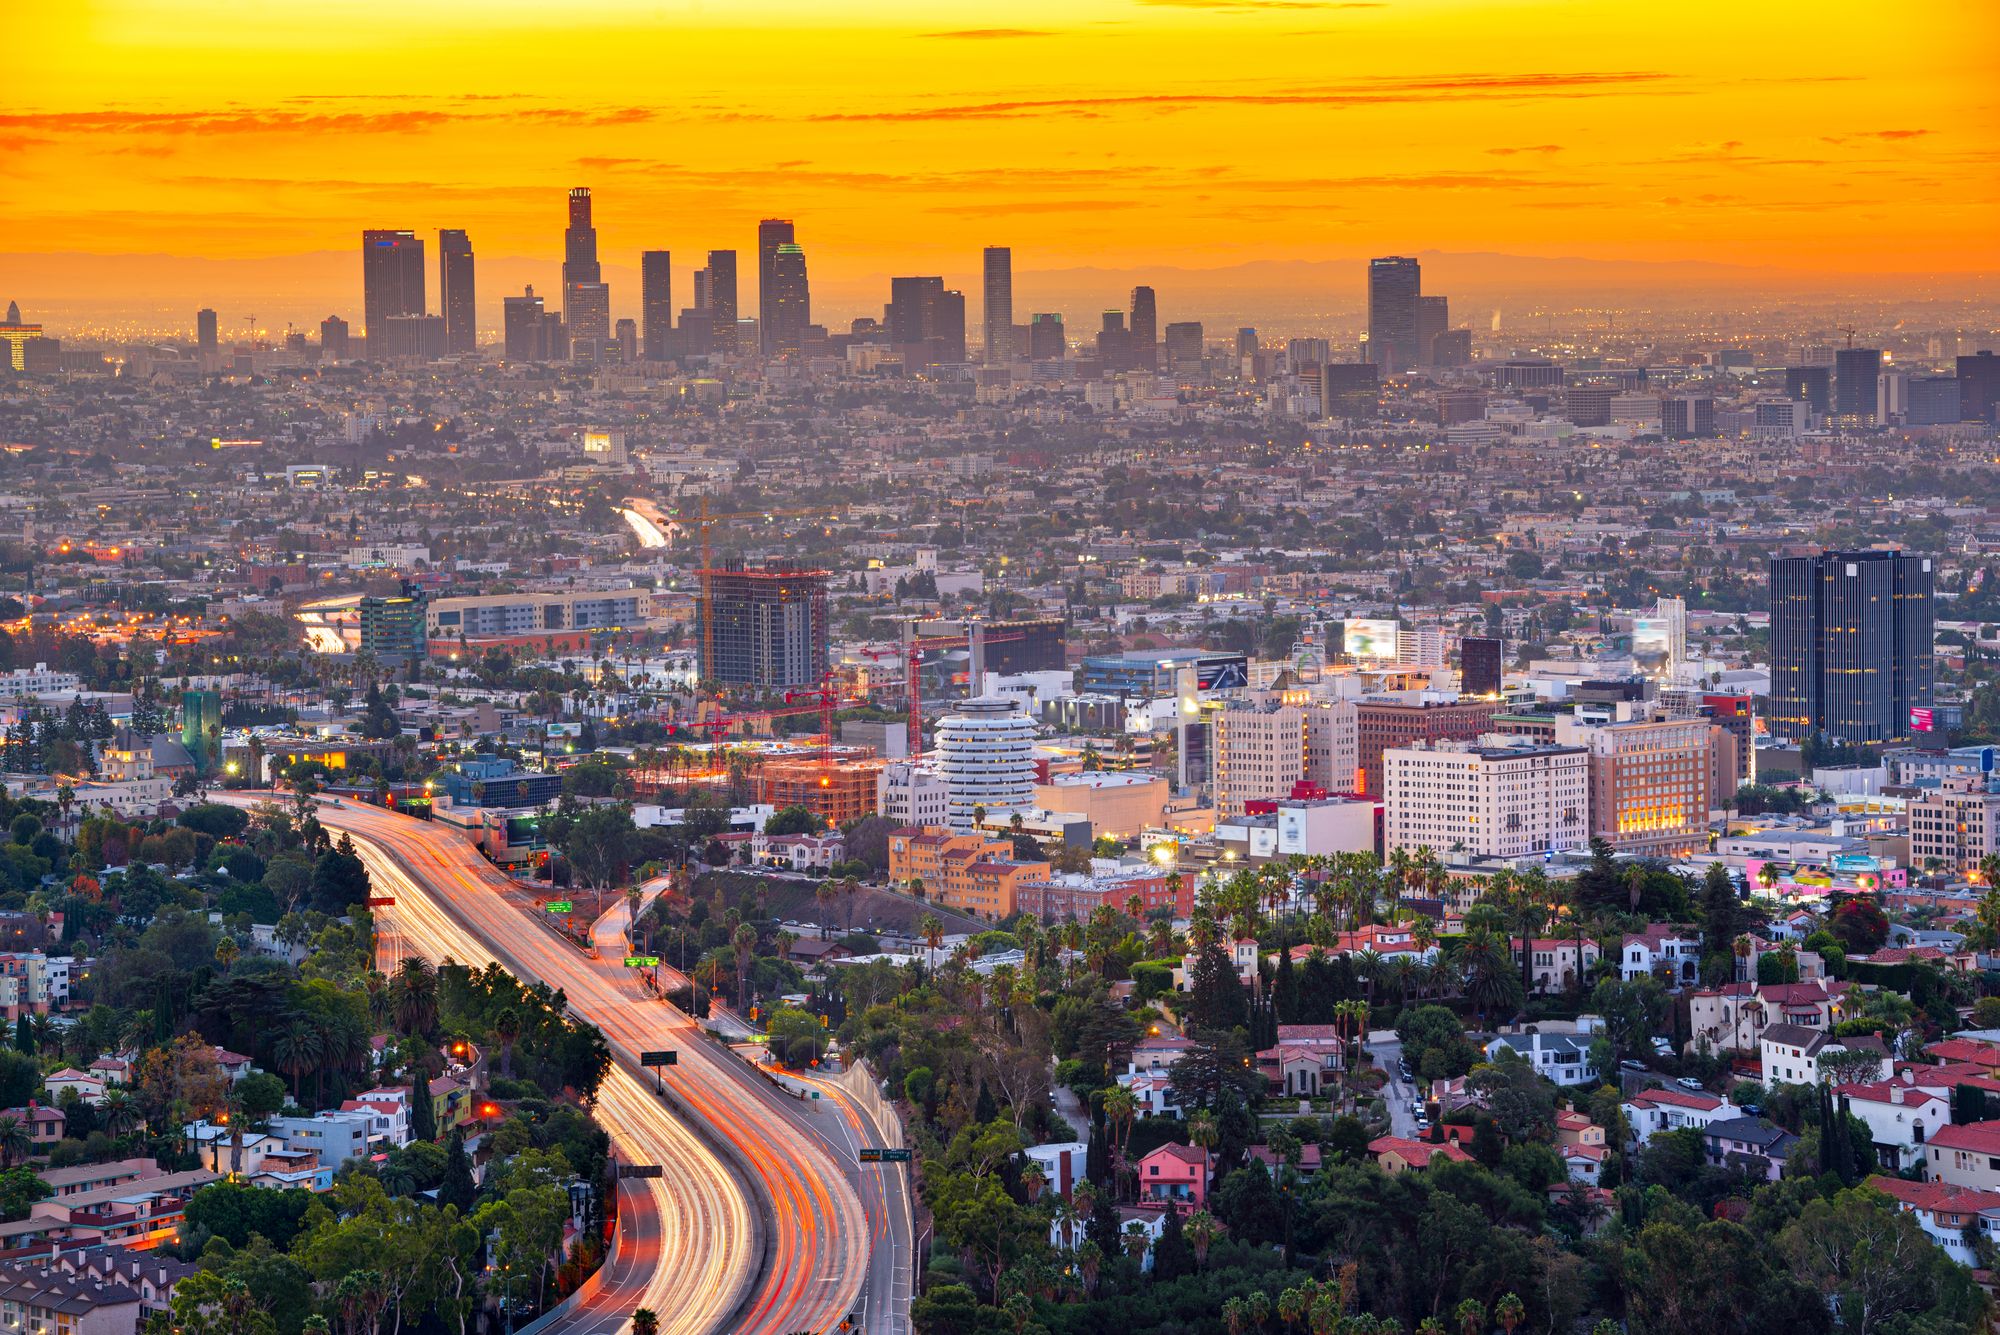 Video Production in Los Angeles: 5 Amazing Videos To Inspire Your Next Shoot